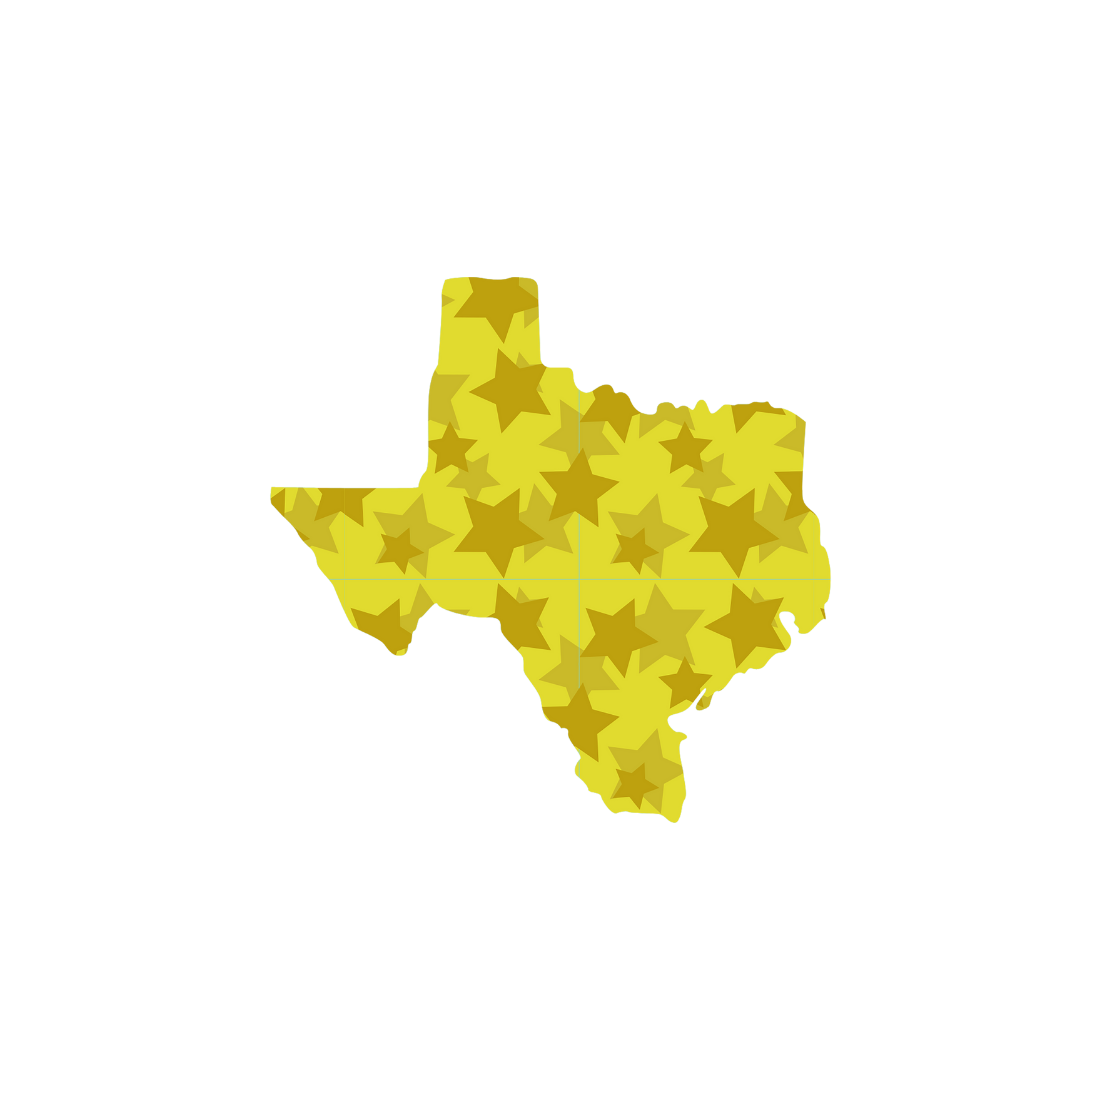 Gold Star Clip Art - 50 Images of All 50 States